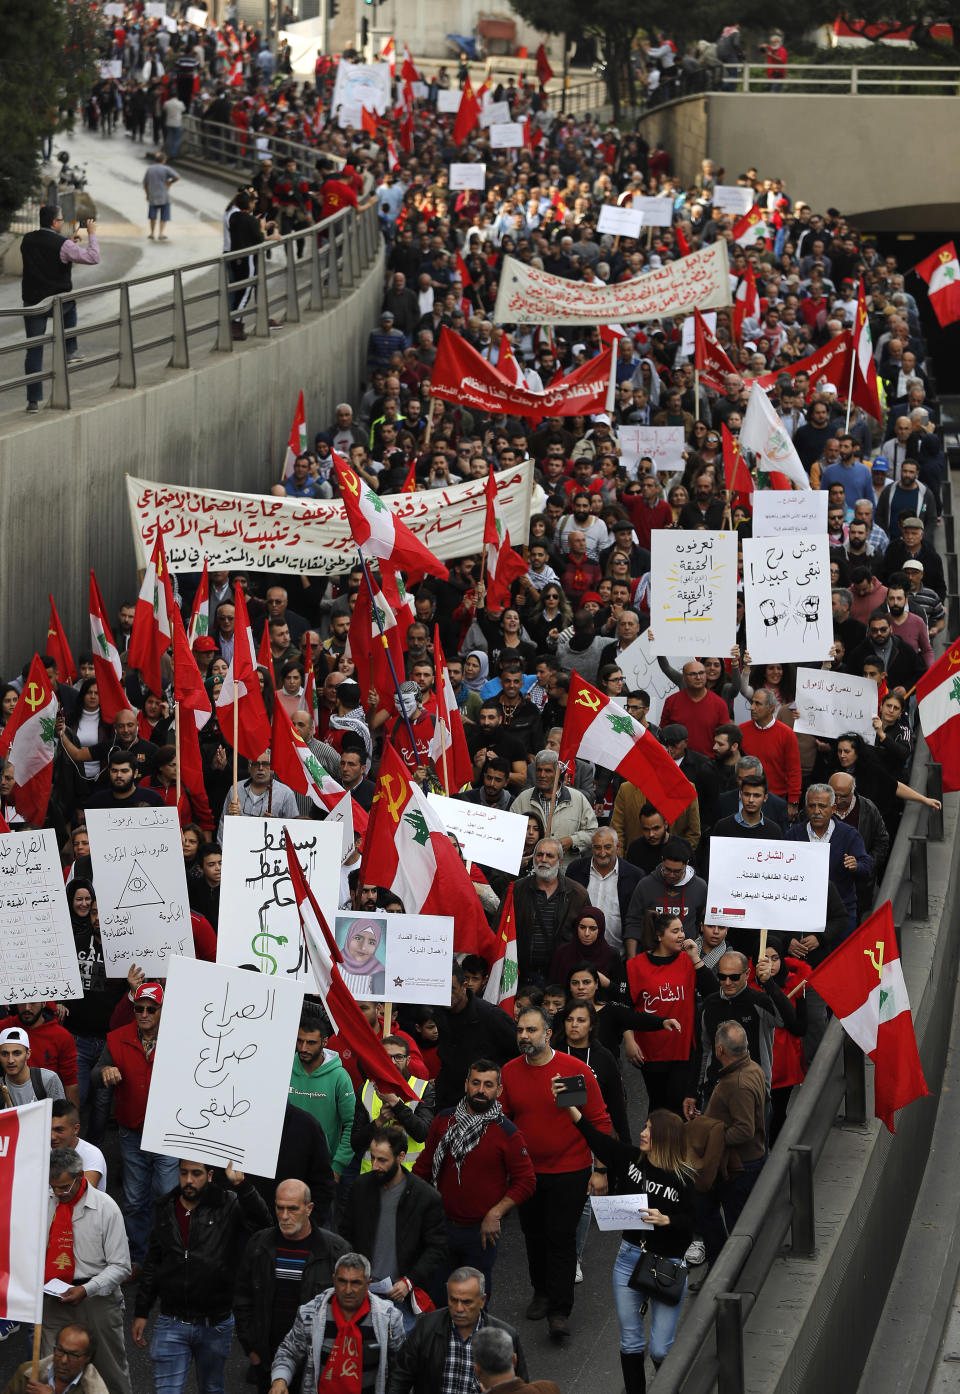 Anti-government demonstrators hold banners during a march organized by the country's communist party, in Beirut, Lebanon, Sunday, Dec. 16, 2018. Hundreds of Lebanese called for an end to a stalemate over forming a government seven months after elections. The Sunday protests were organized by the country's vibrant communist party, but drew others frustrated by the country's deepening economic and political crisis. (AP Photo/Hussein Malla)